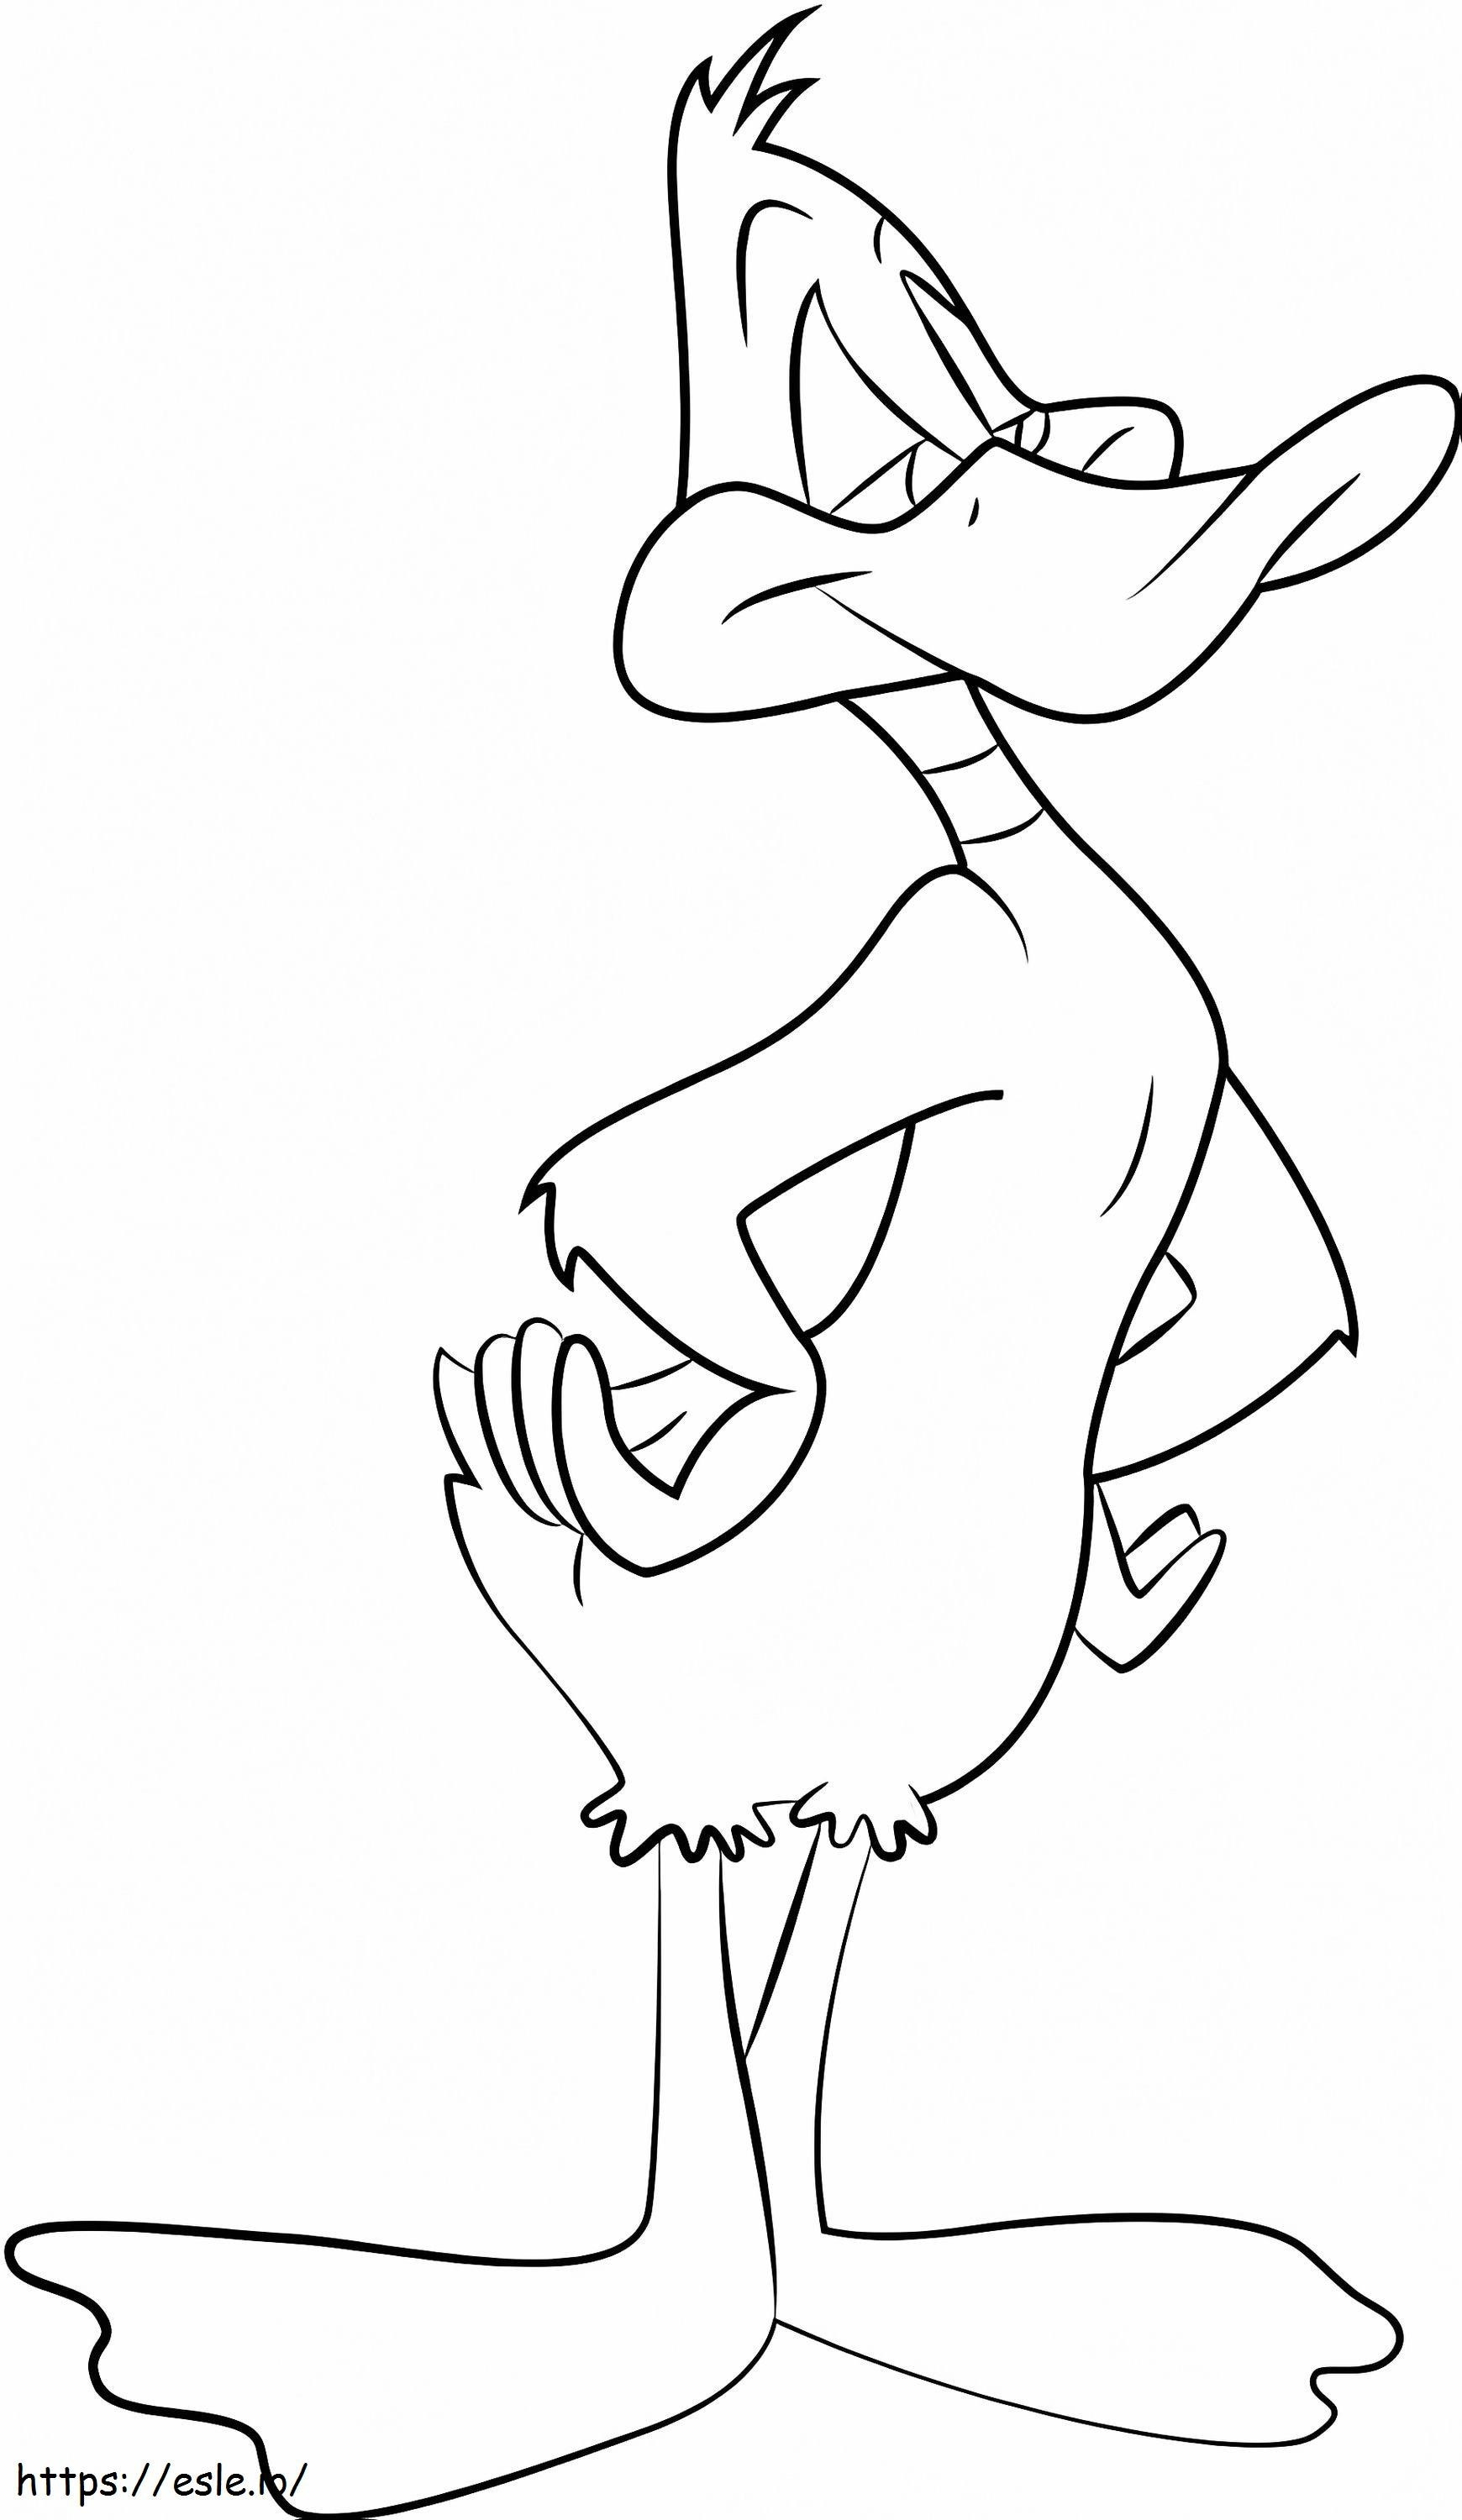 Pato Lucas Simple coloring page